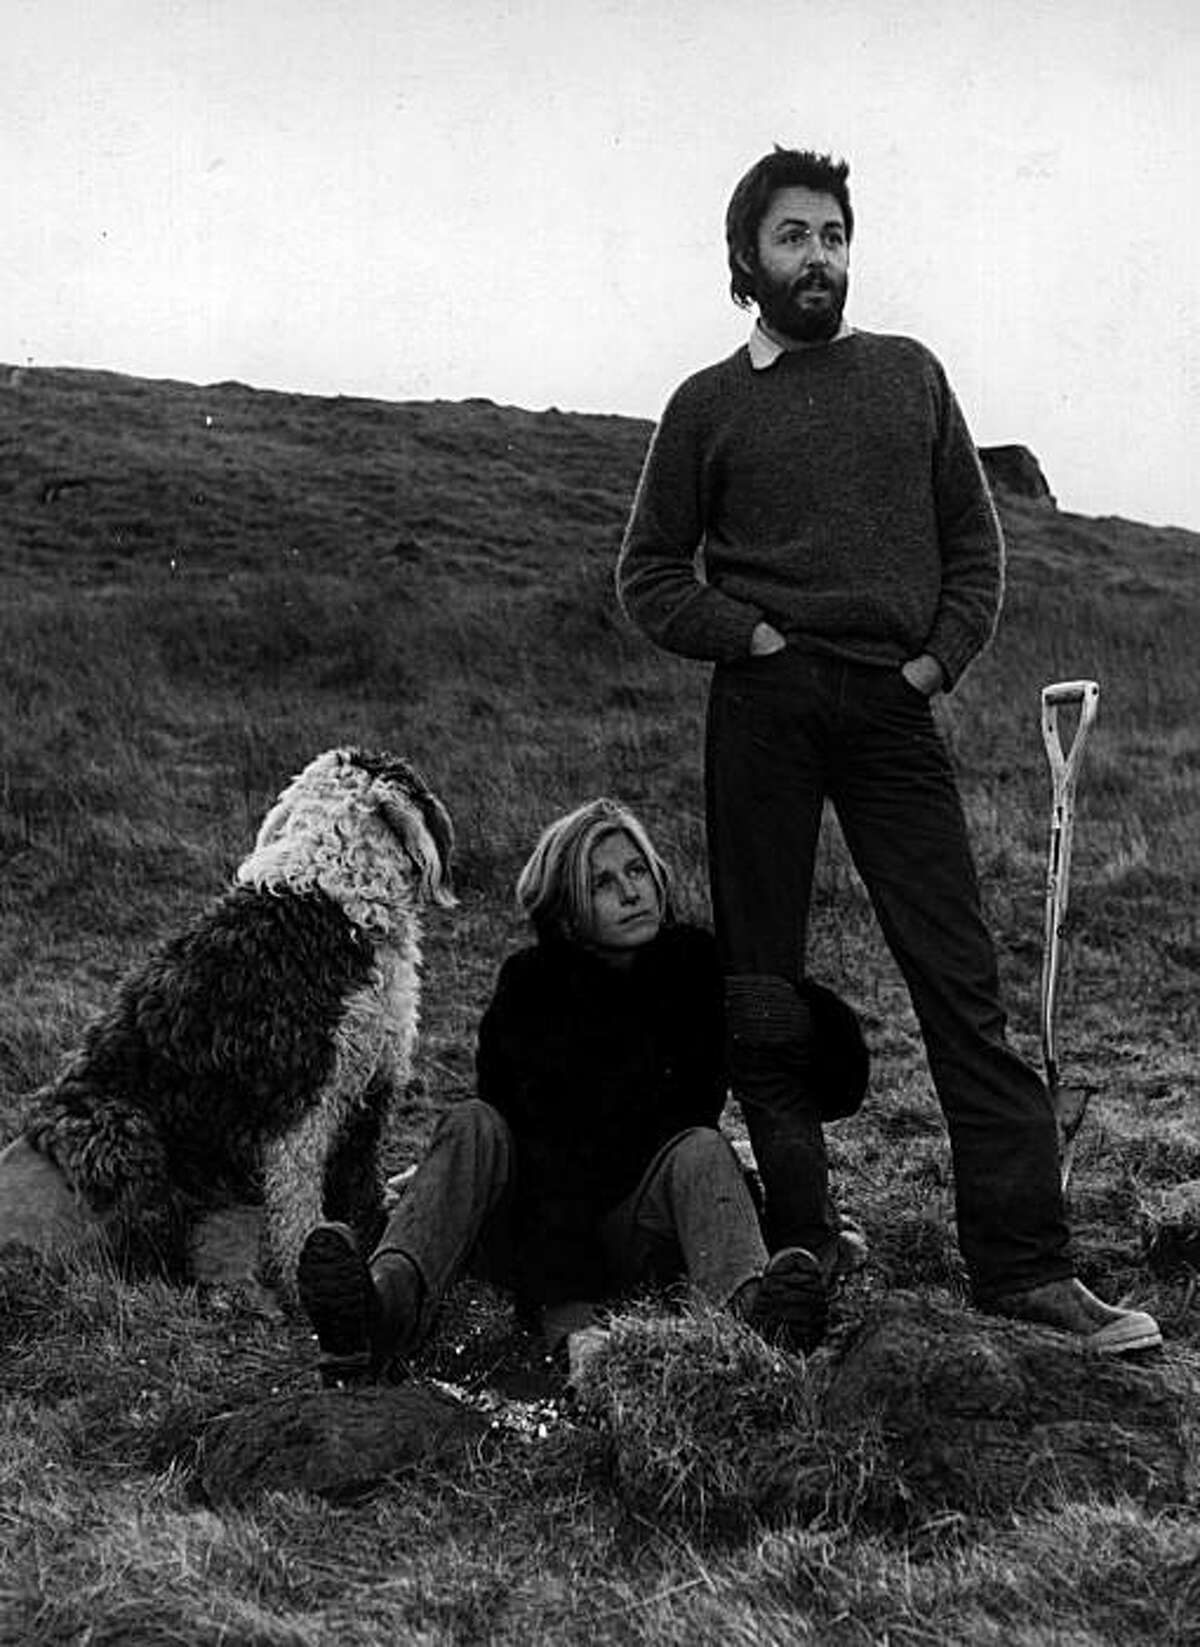 5th January 1970: Paul and Linda McCartney (1941 - 1998) on their lonely farm near the fishing town of Campbeltown, the day after McCartney started High Court proceedings to seal the final break-up of the Beatles. Mirror Syndication International.